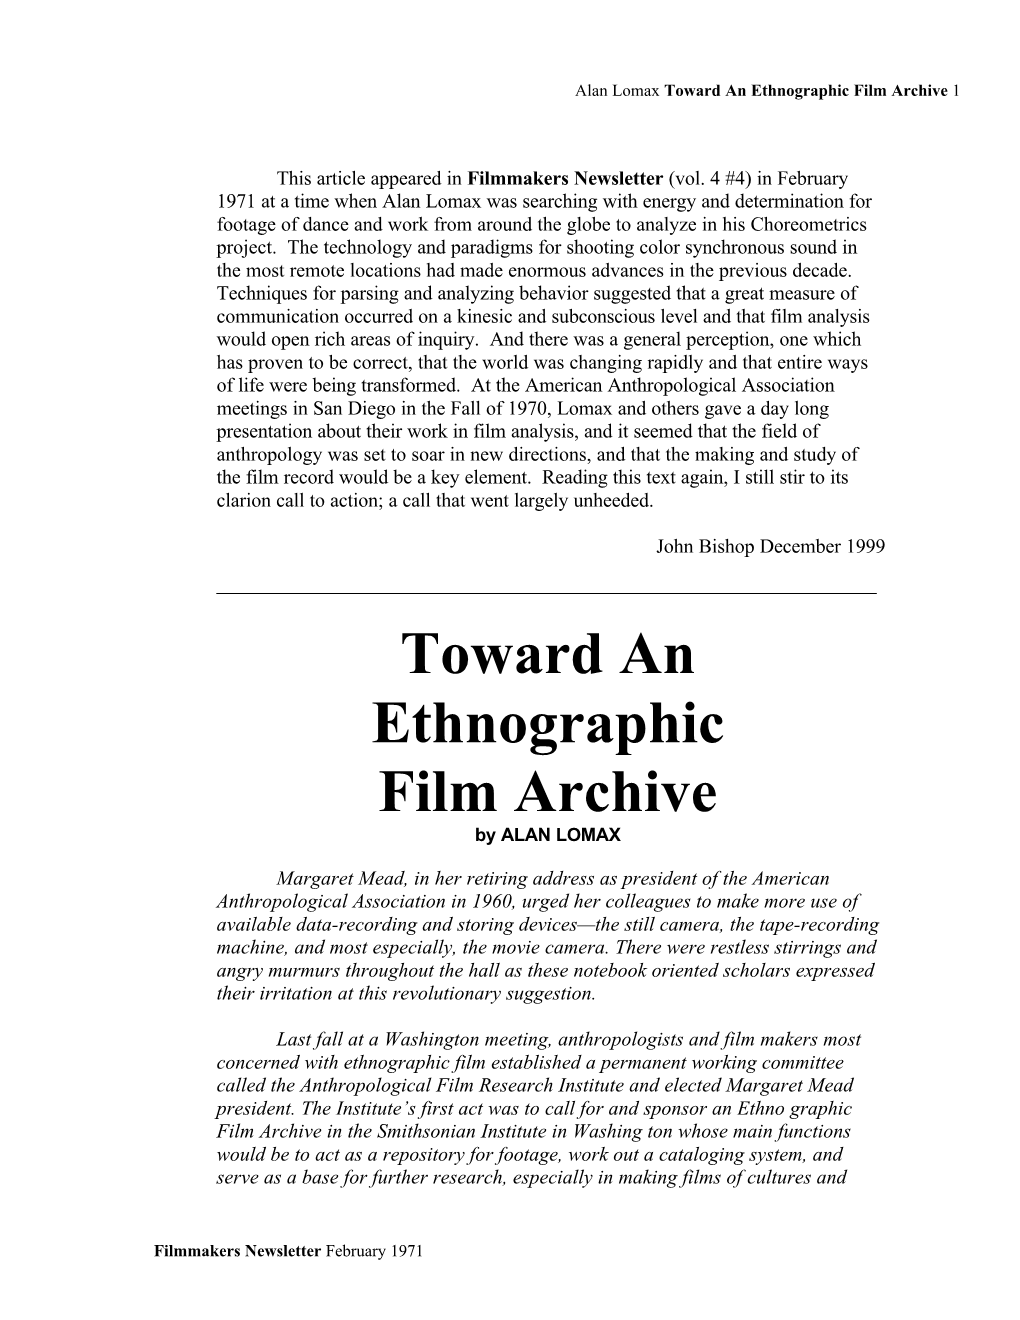 Toward an Ethnographic Film Archive 1